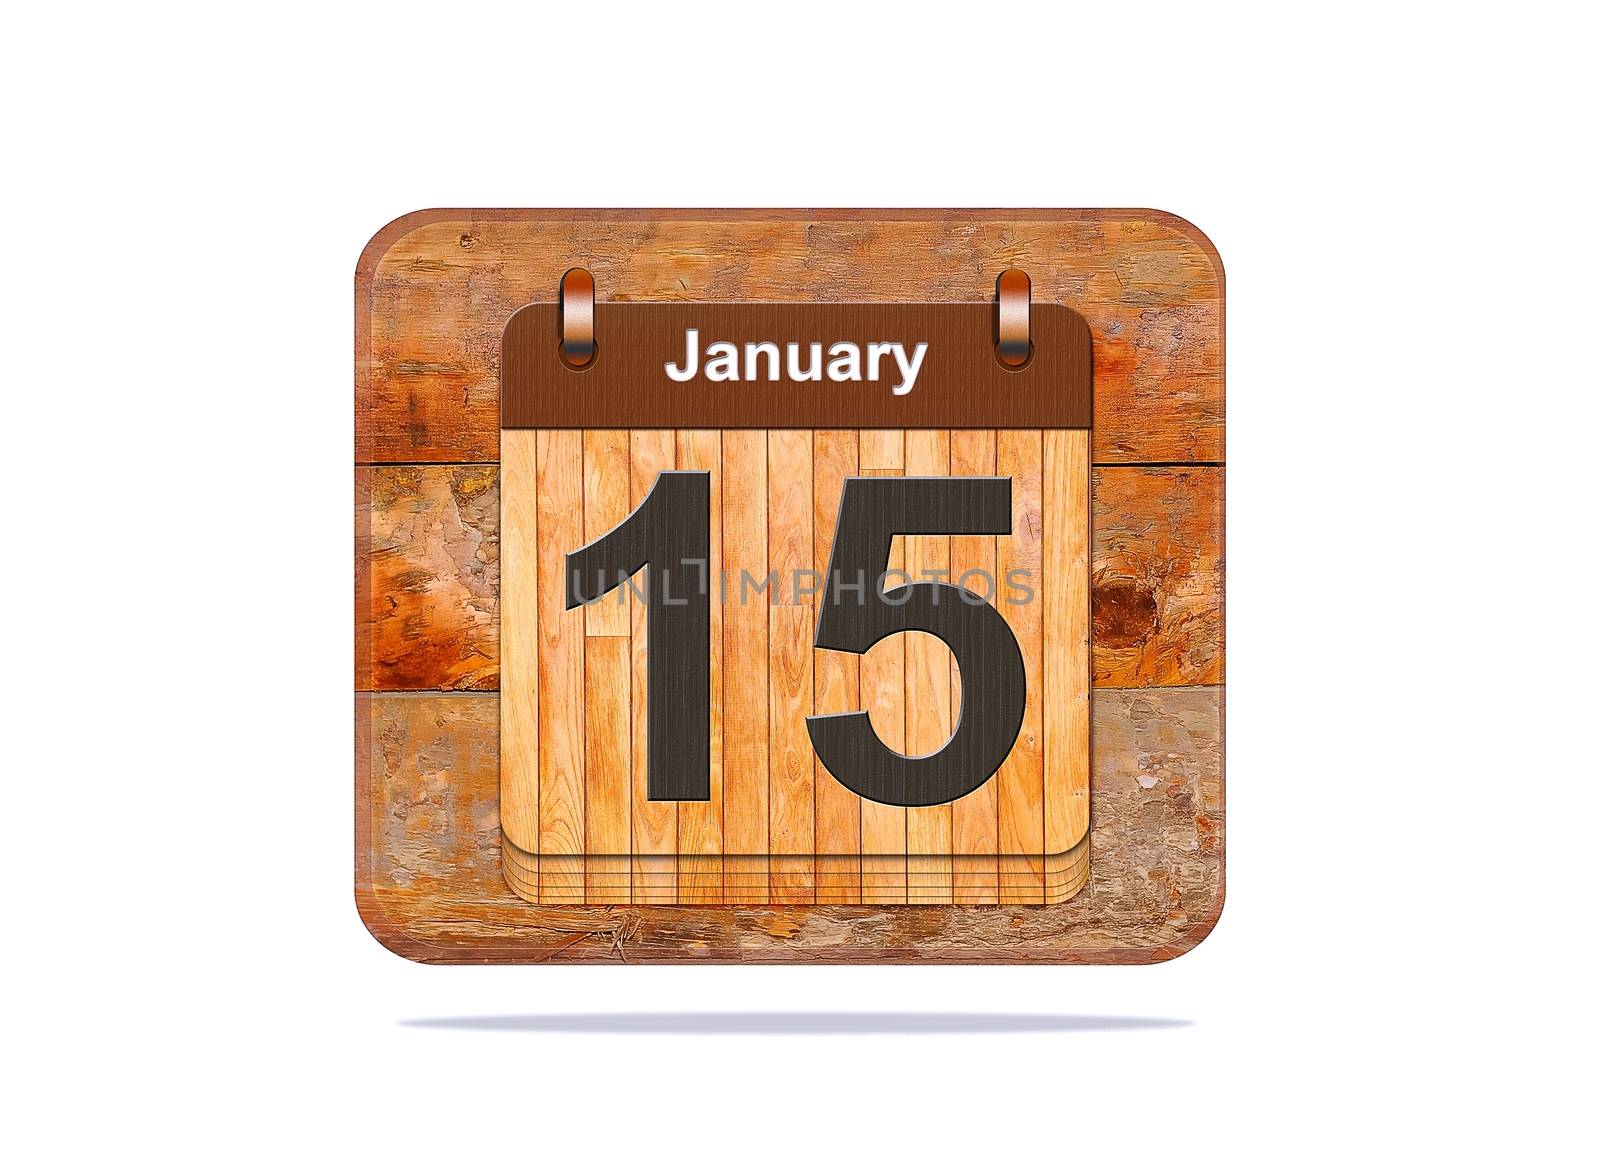 Calendar with the date of January 15.